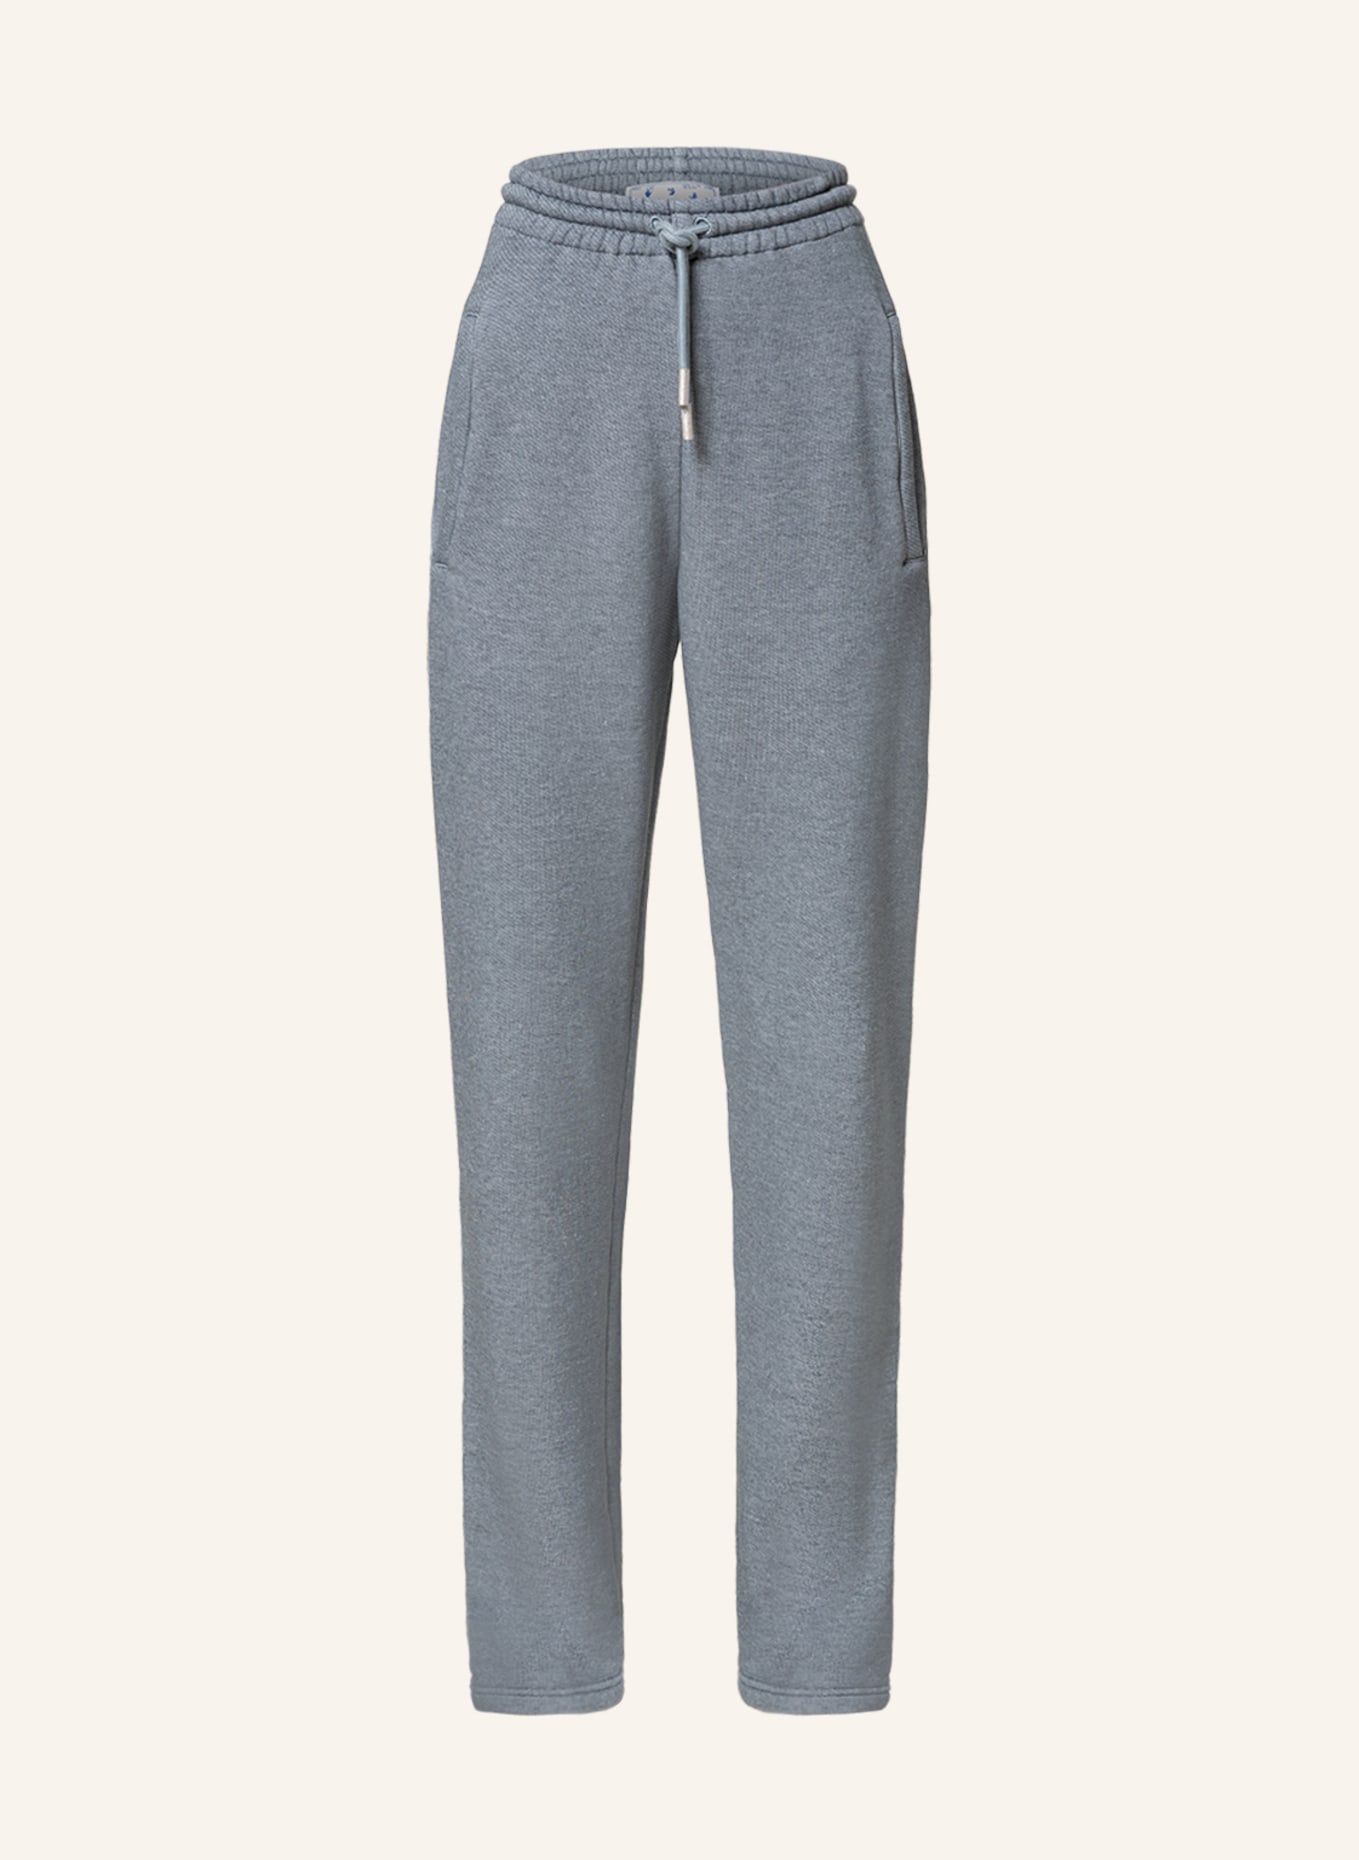 Off-White Pants in jogger style , Color: GRAY (Image 1)